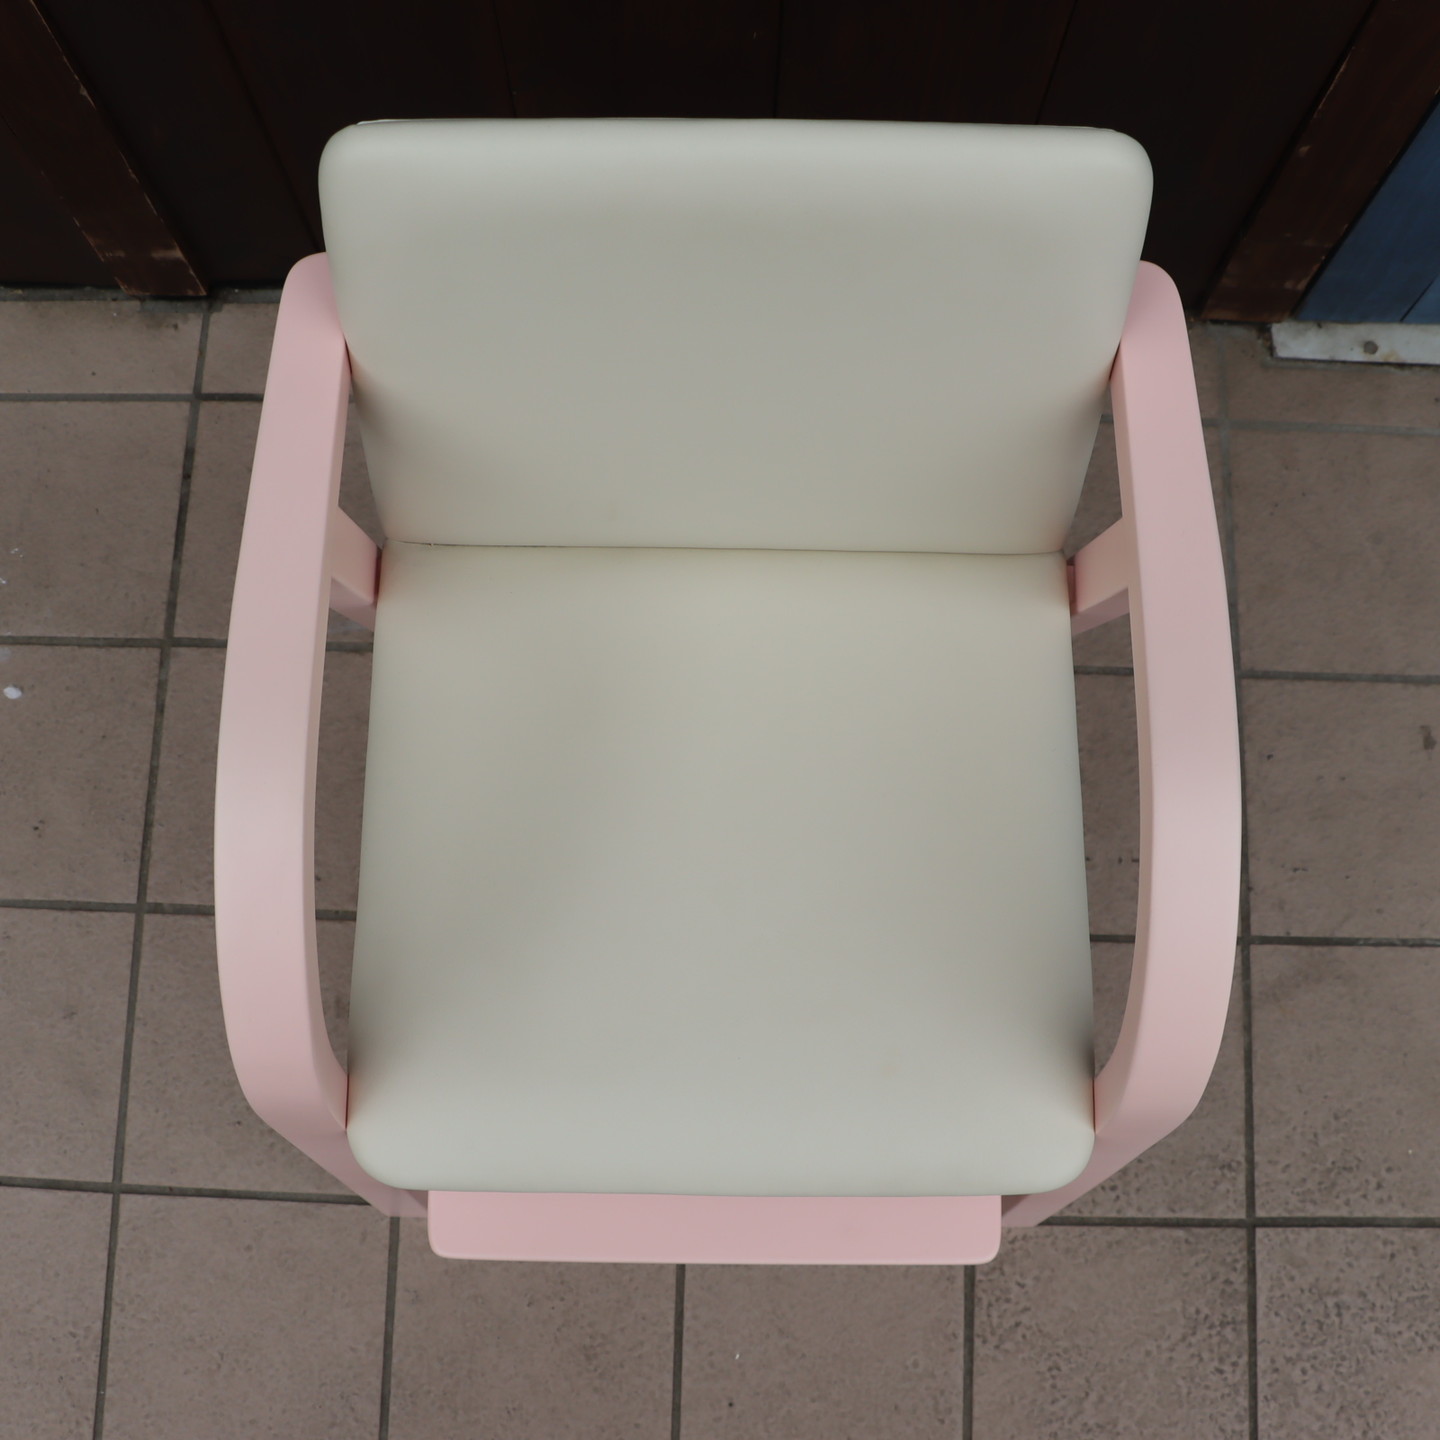 AKIMOKU Akita woodworking No.42 beech material baby chair pink high chair Kids chair IDC large . furniture Northern Europe style simple bending tree child chair DC426